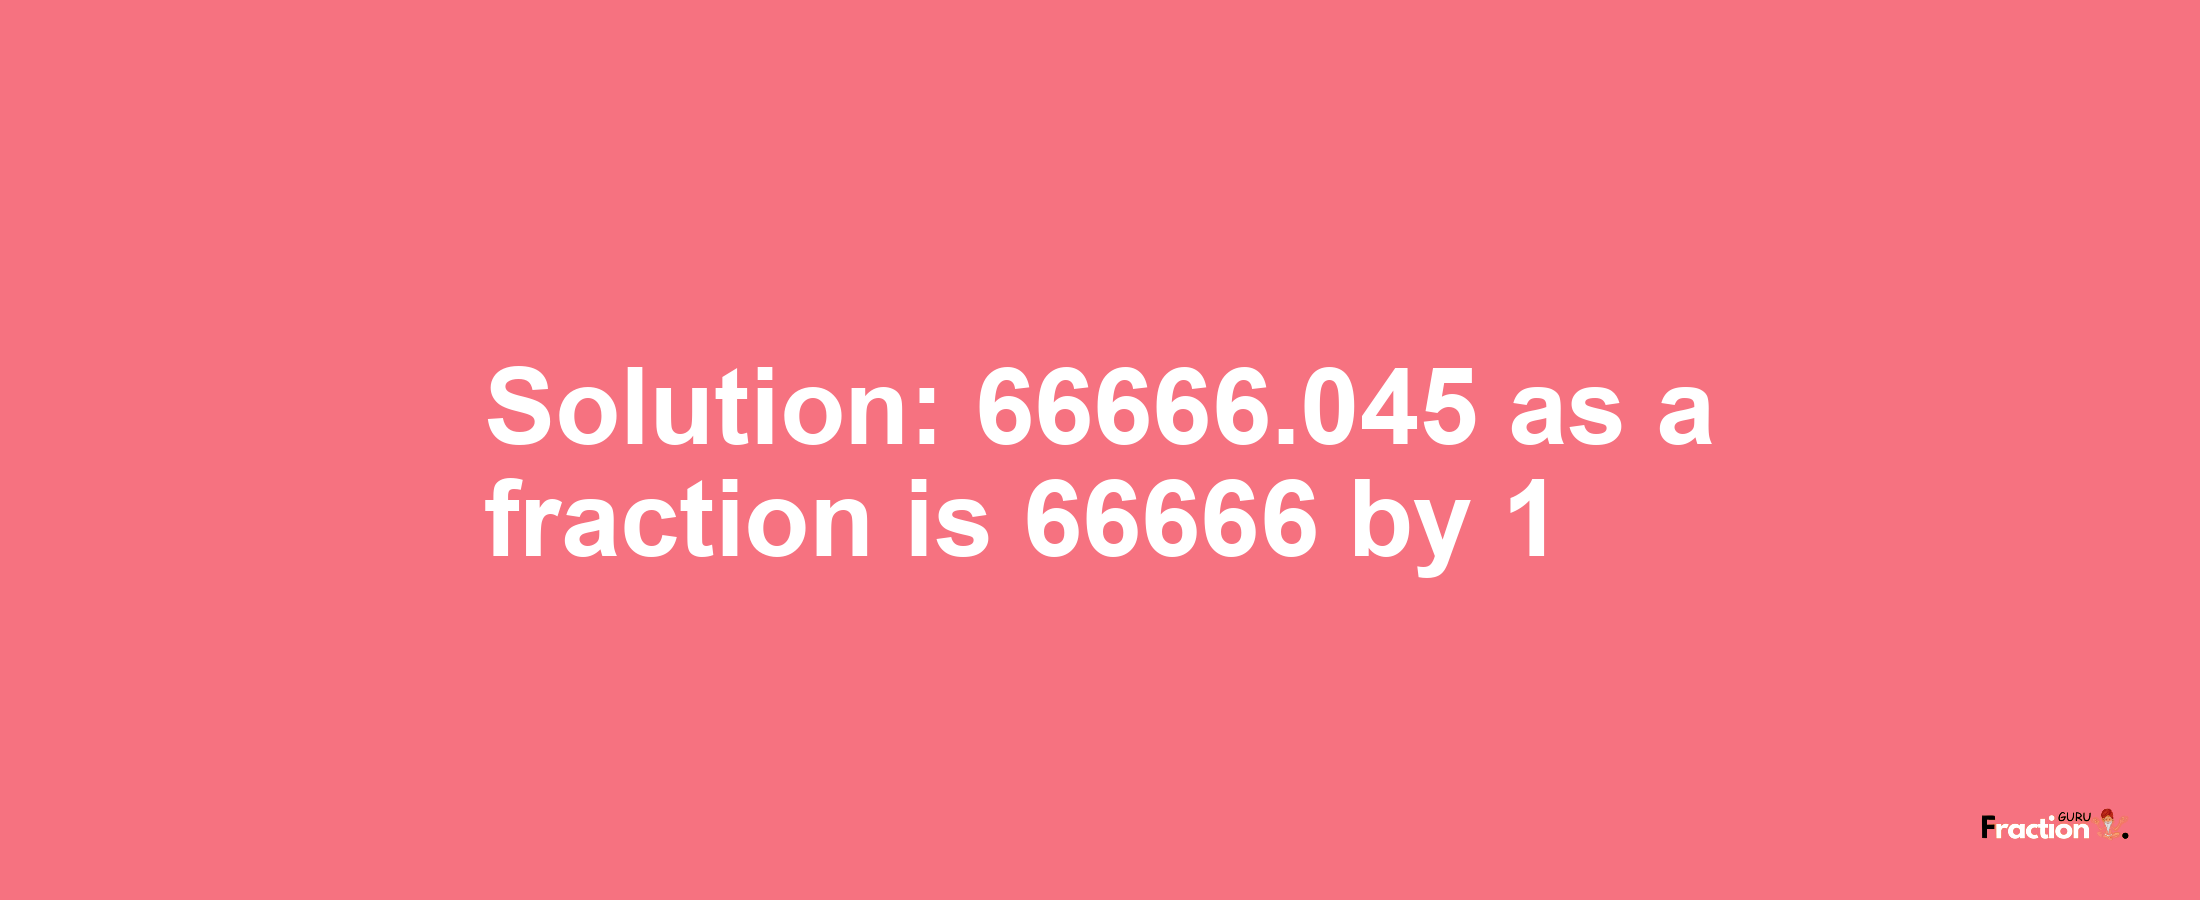 Solution:66666.045 as a fraction is 66666/1